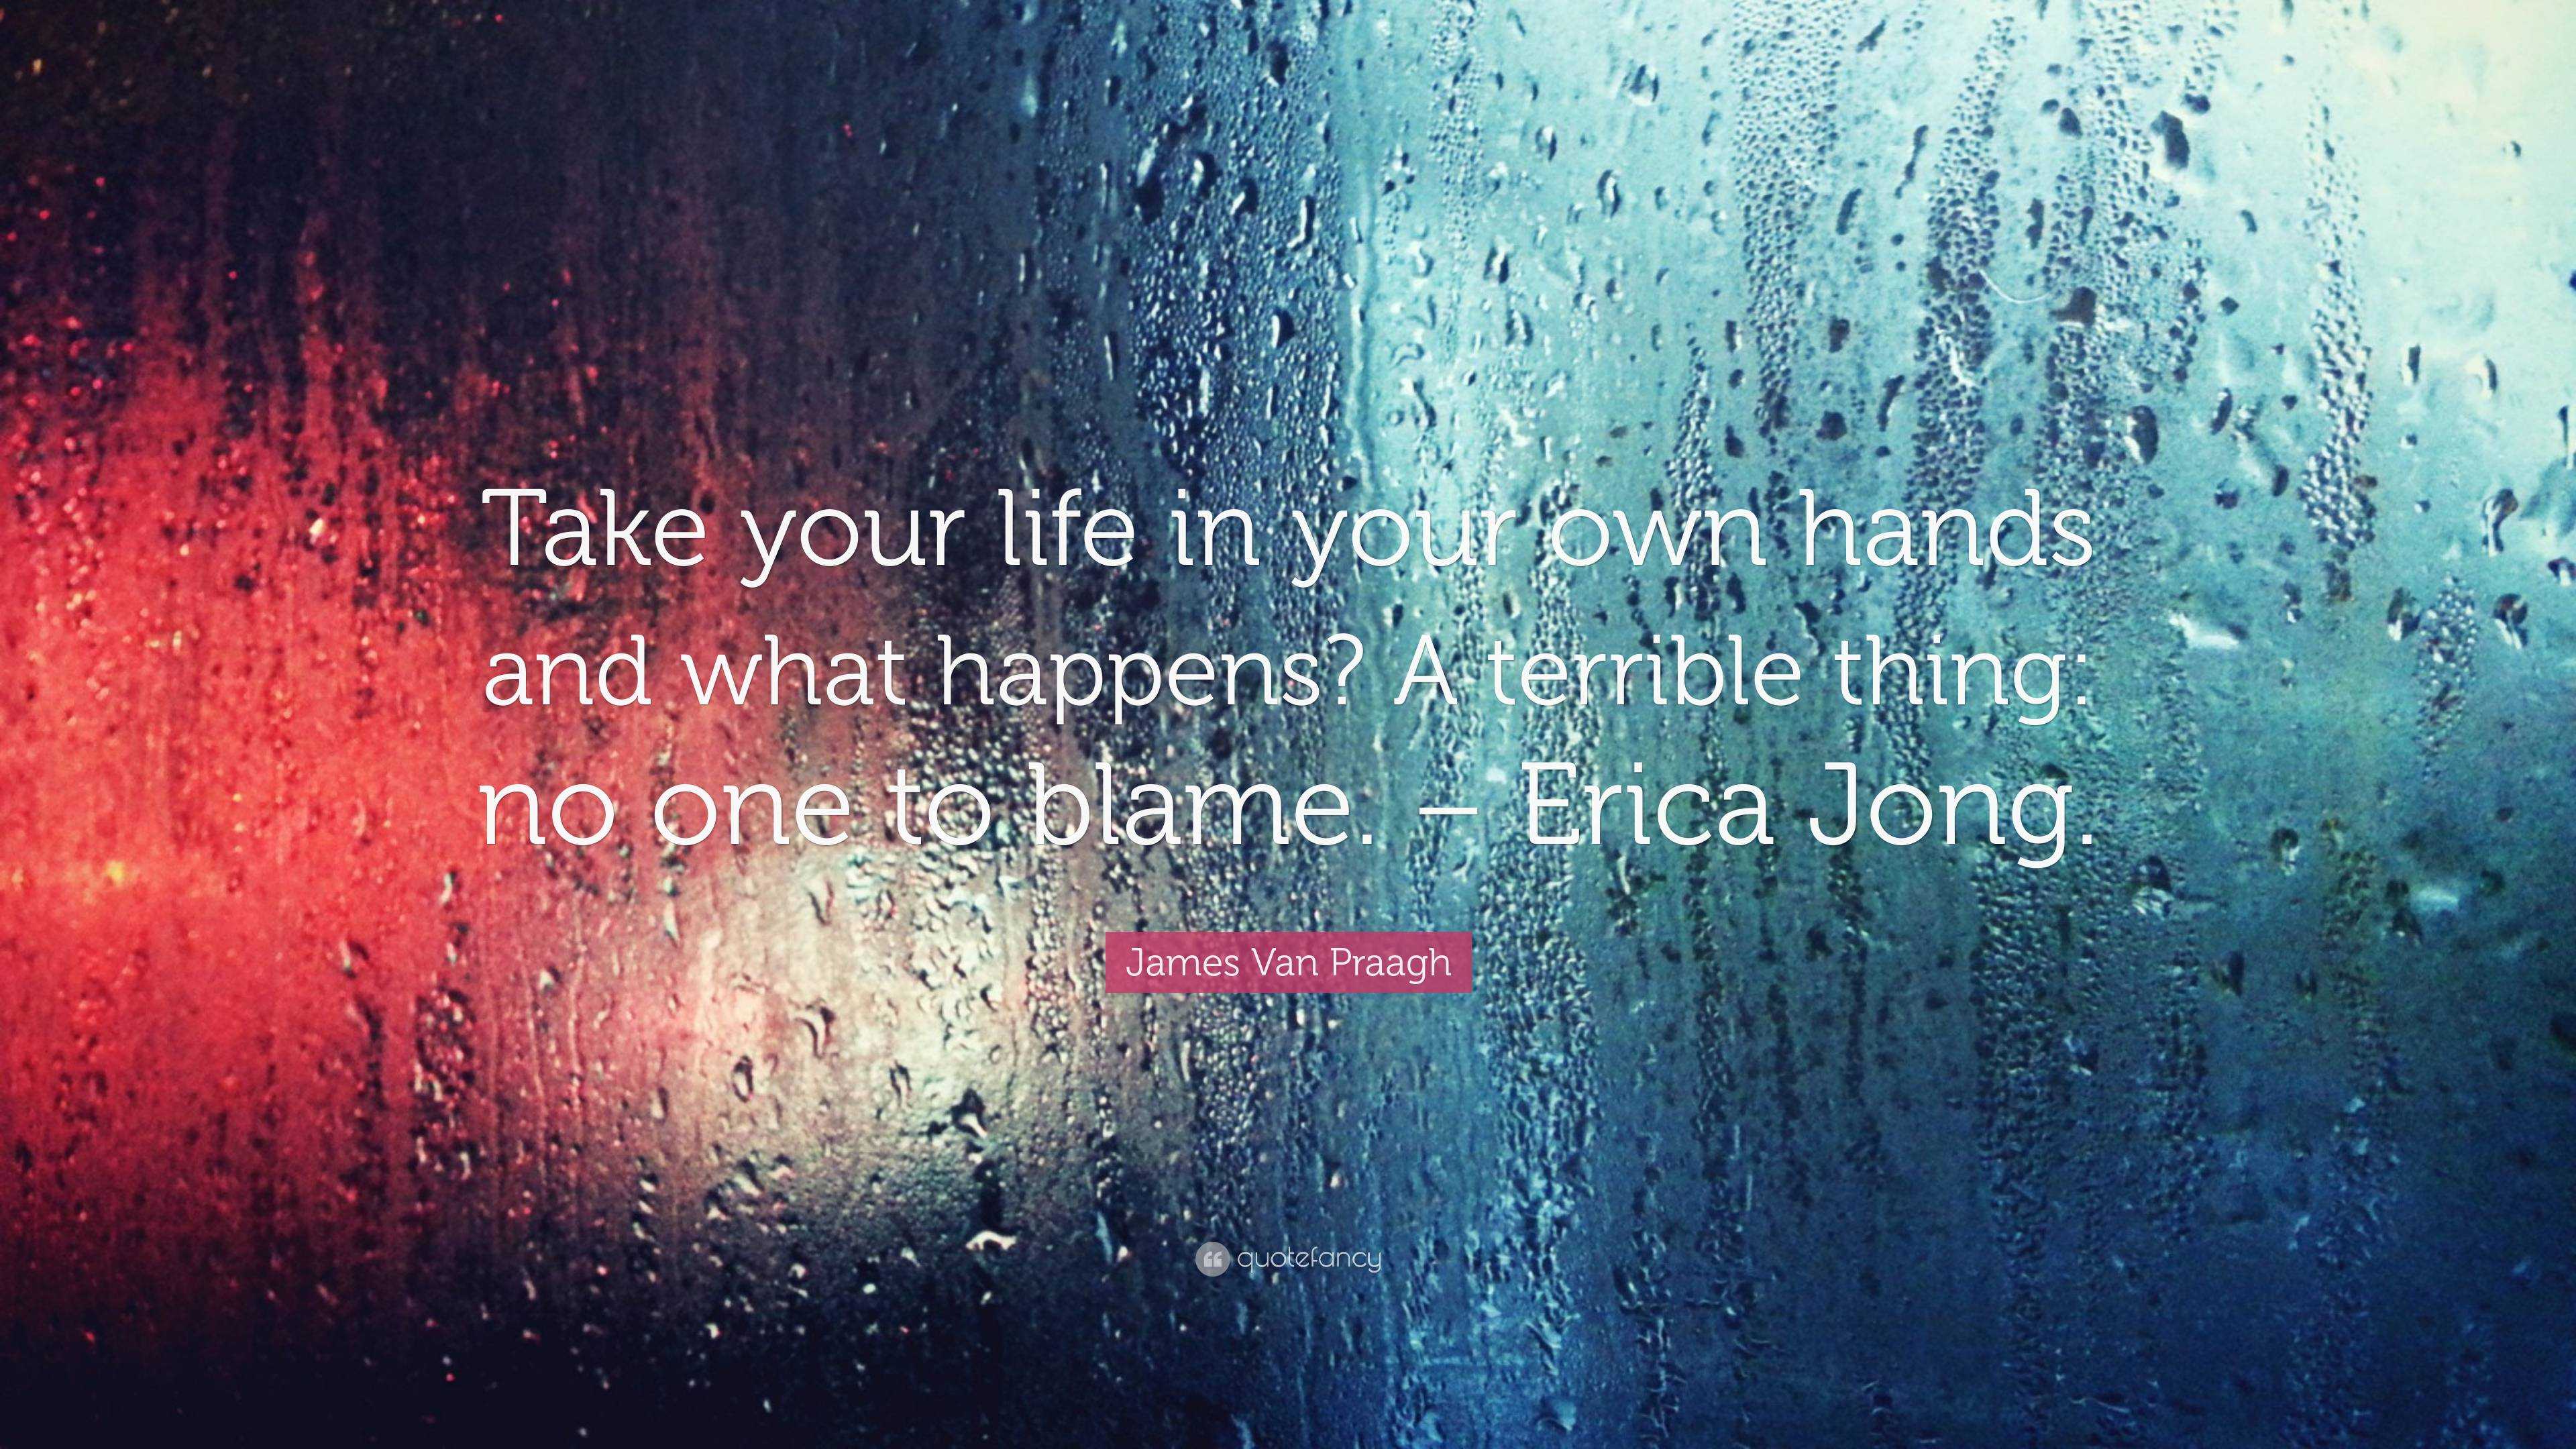 James Van Praagh Quote Take Your Life In Your Own Hands And What Happens A Terrible